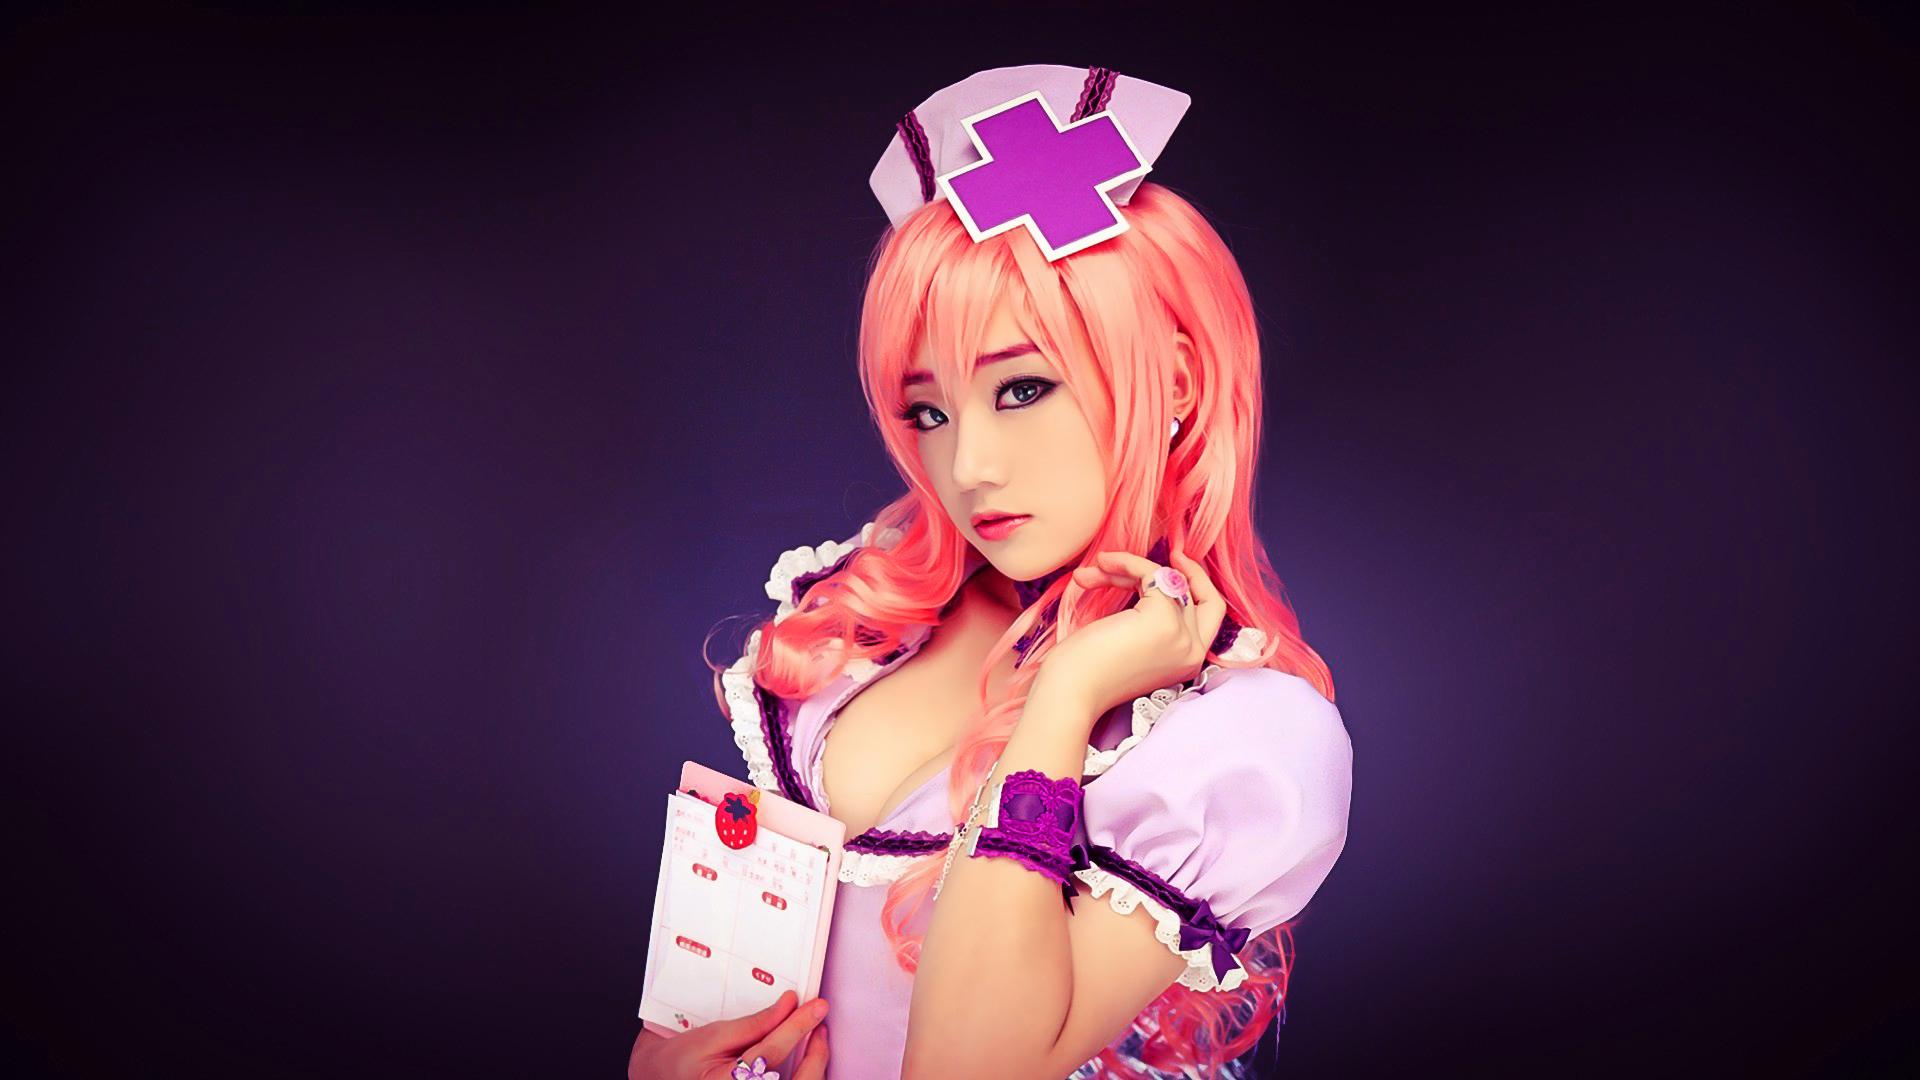 Hd anime cosplay wallpapers